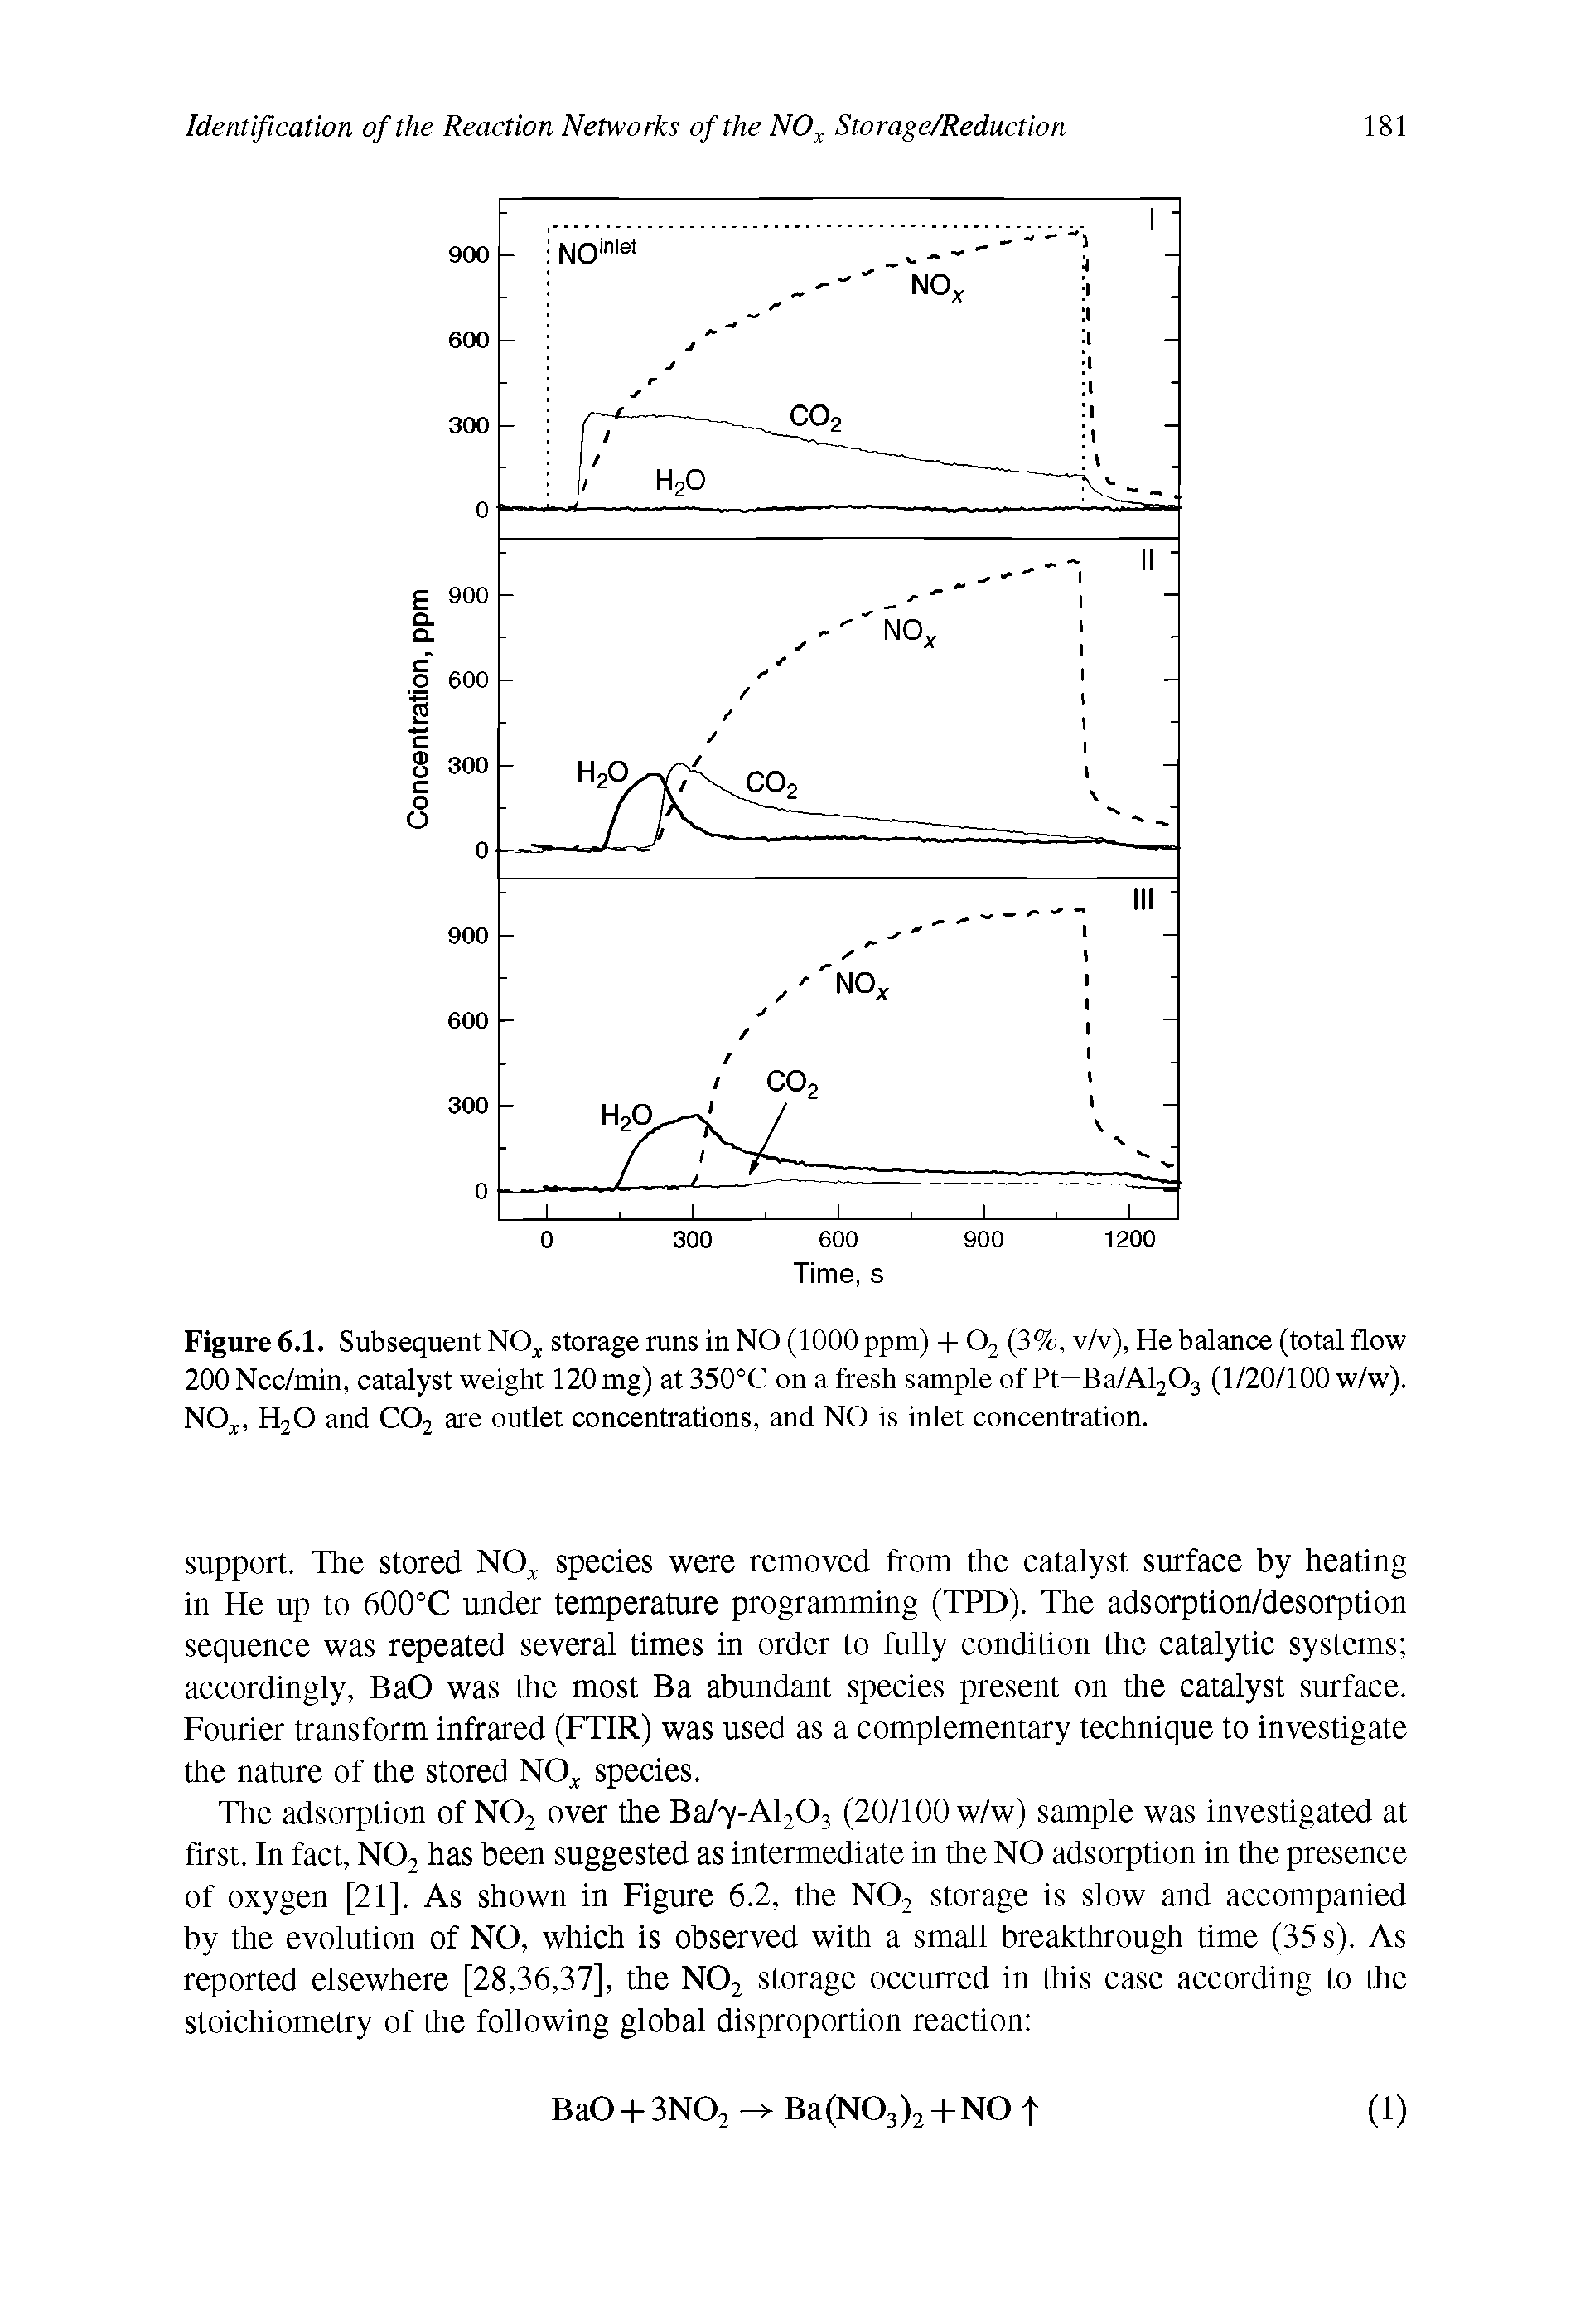 Figure 6.1. Subsequent NO storage runs in NO (1000 ppm) + 02 (3%, v/v), He balance (total flow 200 Ncc/min, catalyst weight 120 mg) at 350°C on a fresh sample of Pt—Ba/Al203 (1/20/100 w/w). NO, H20 and C02 are outlet concentrations, and NO is inlet concentration.